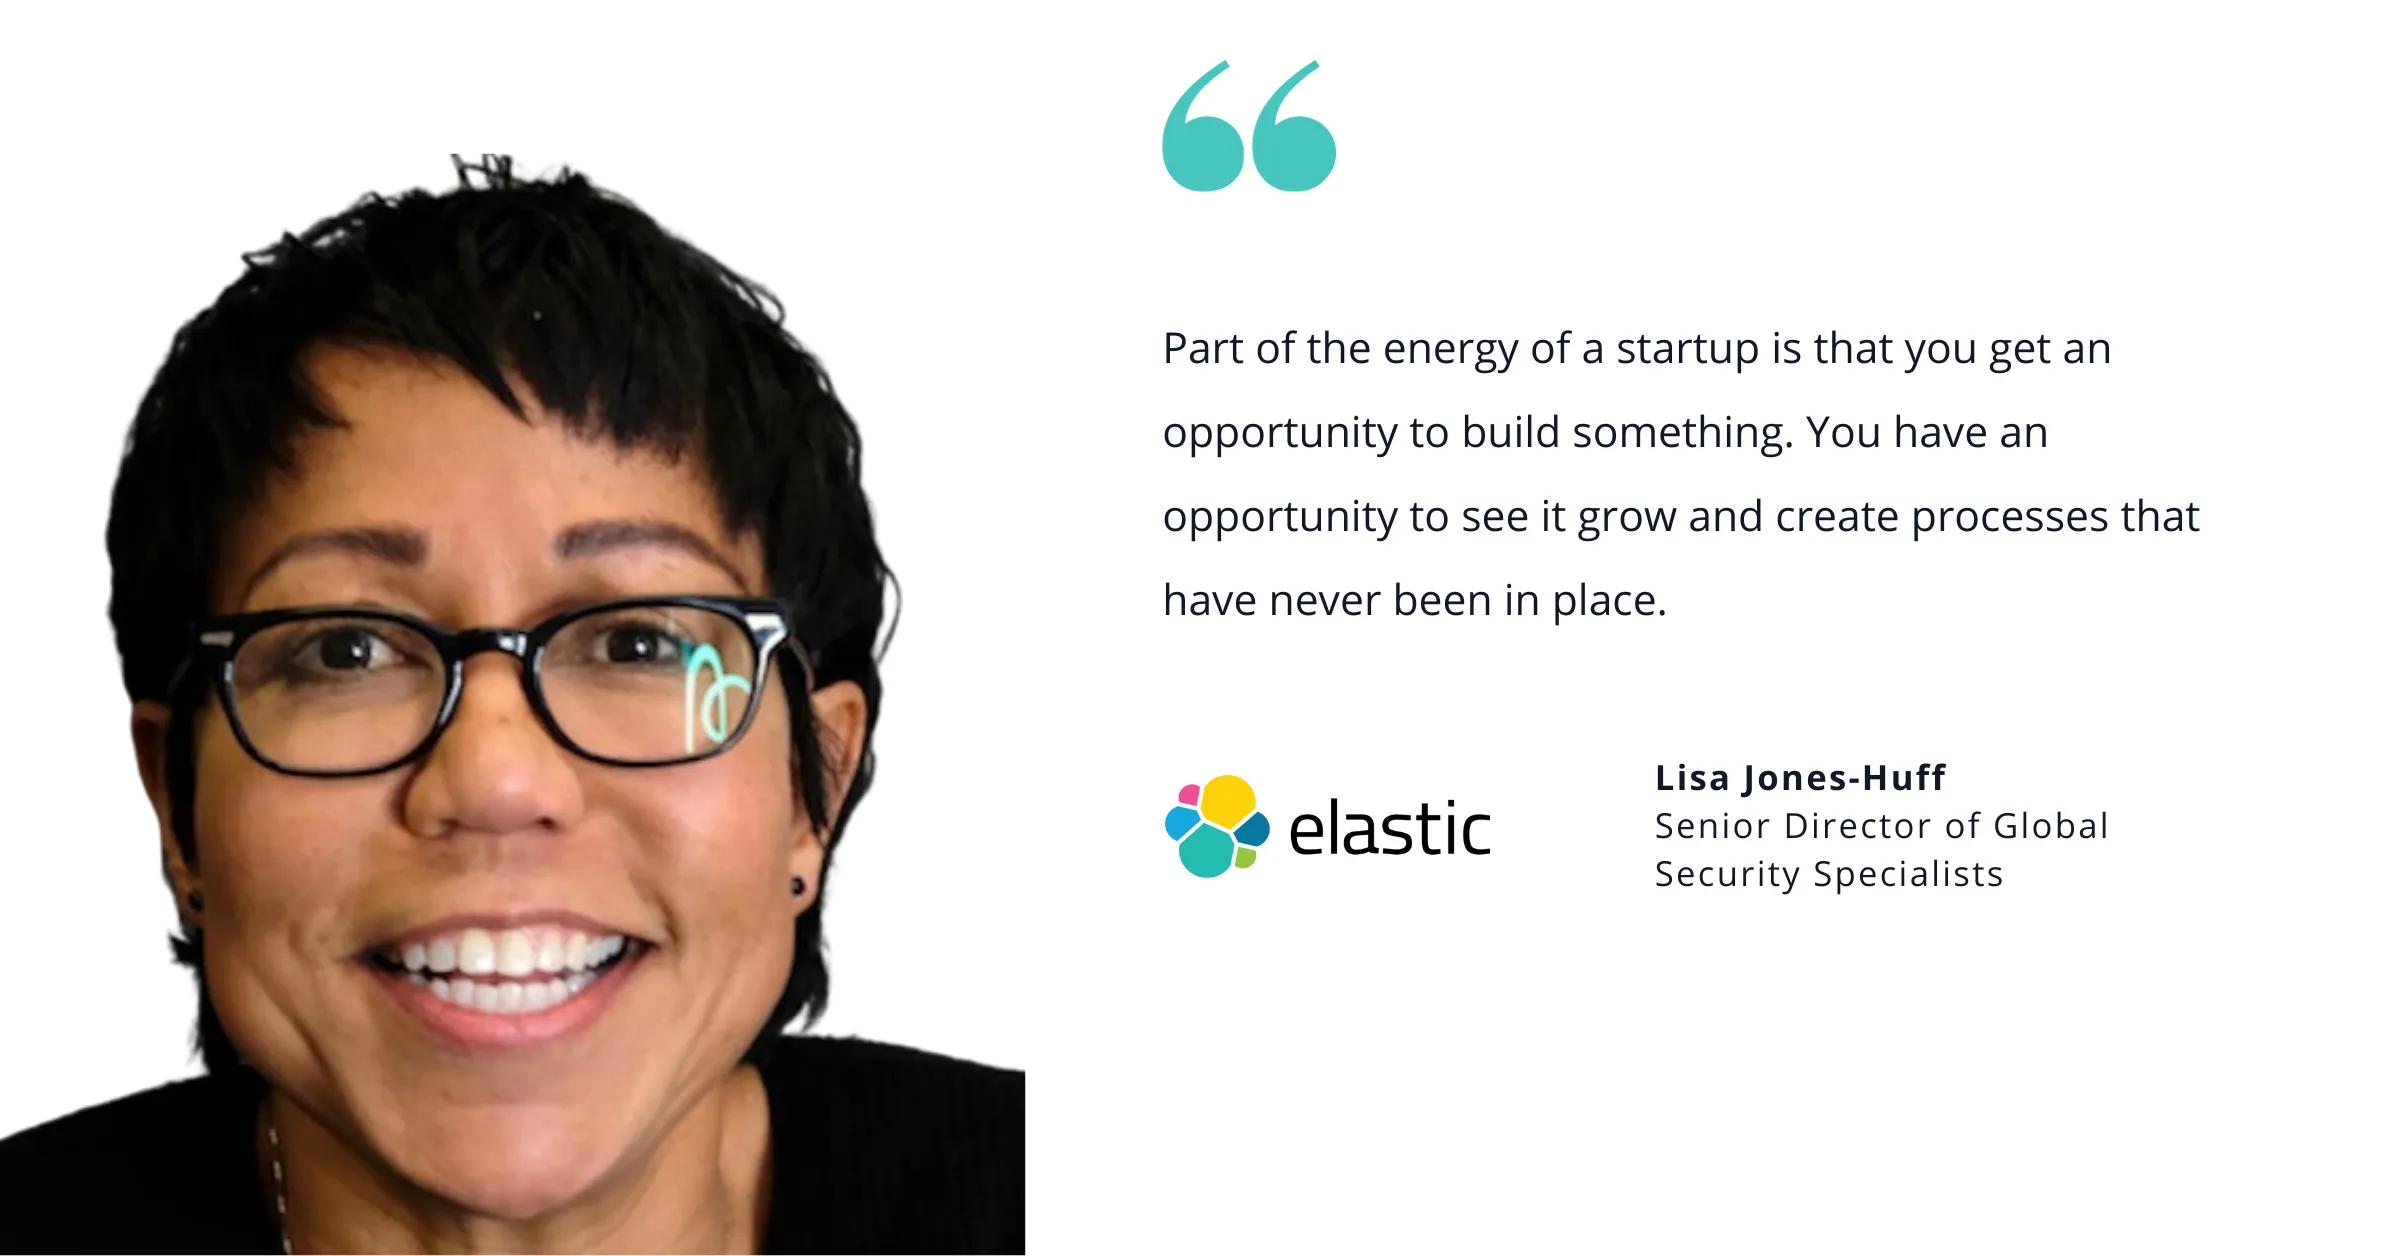 Elastic’s Lisa Jones-Huff reveals how she thrives in a startup atmosphere